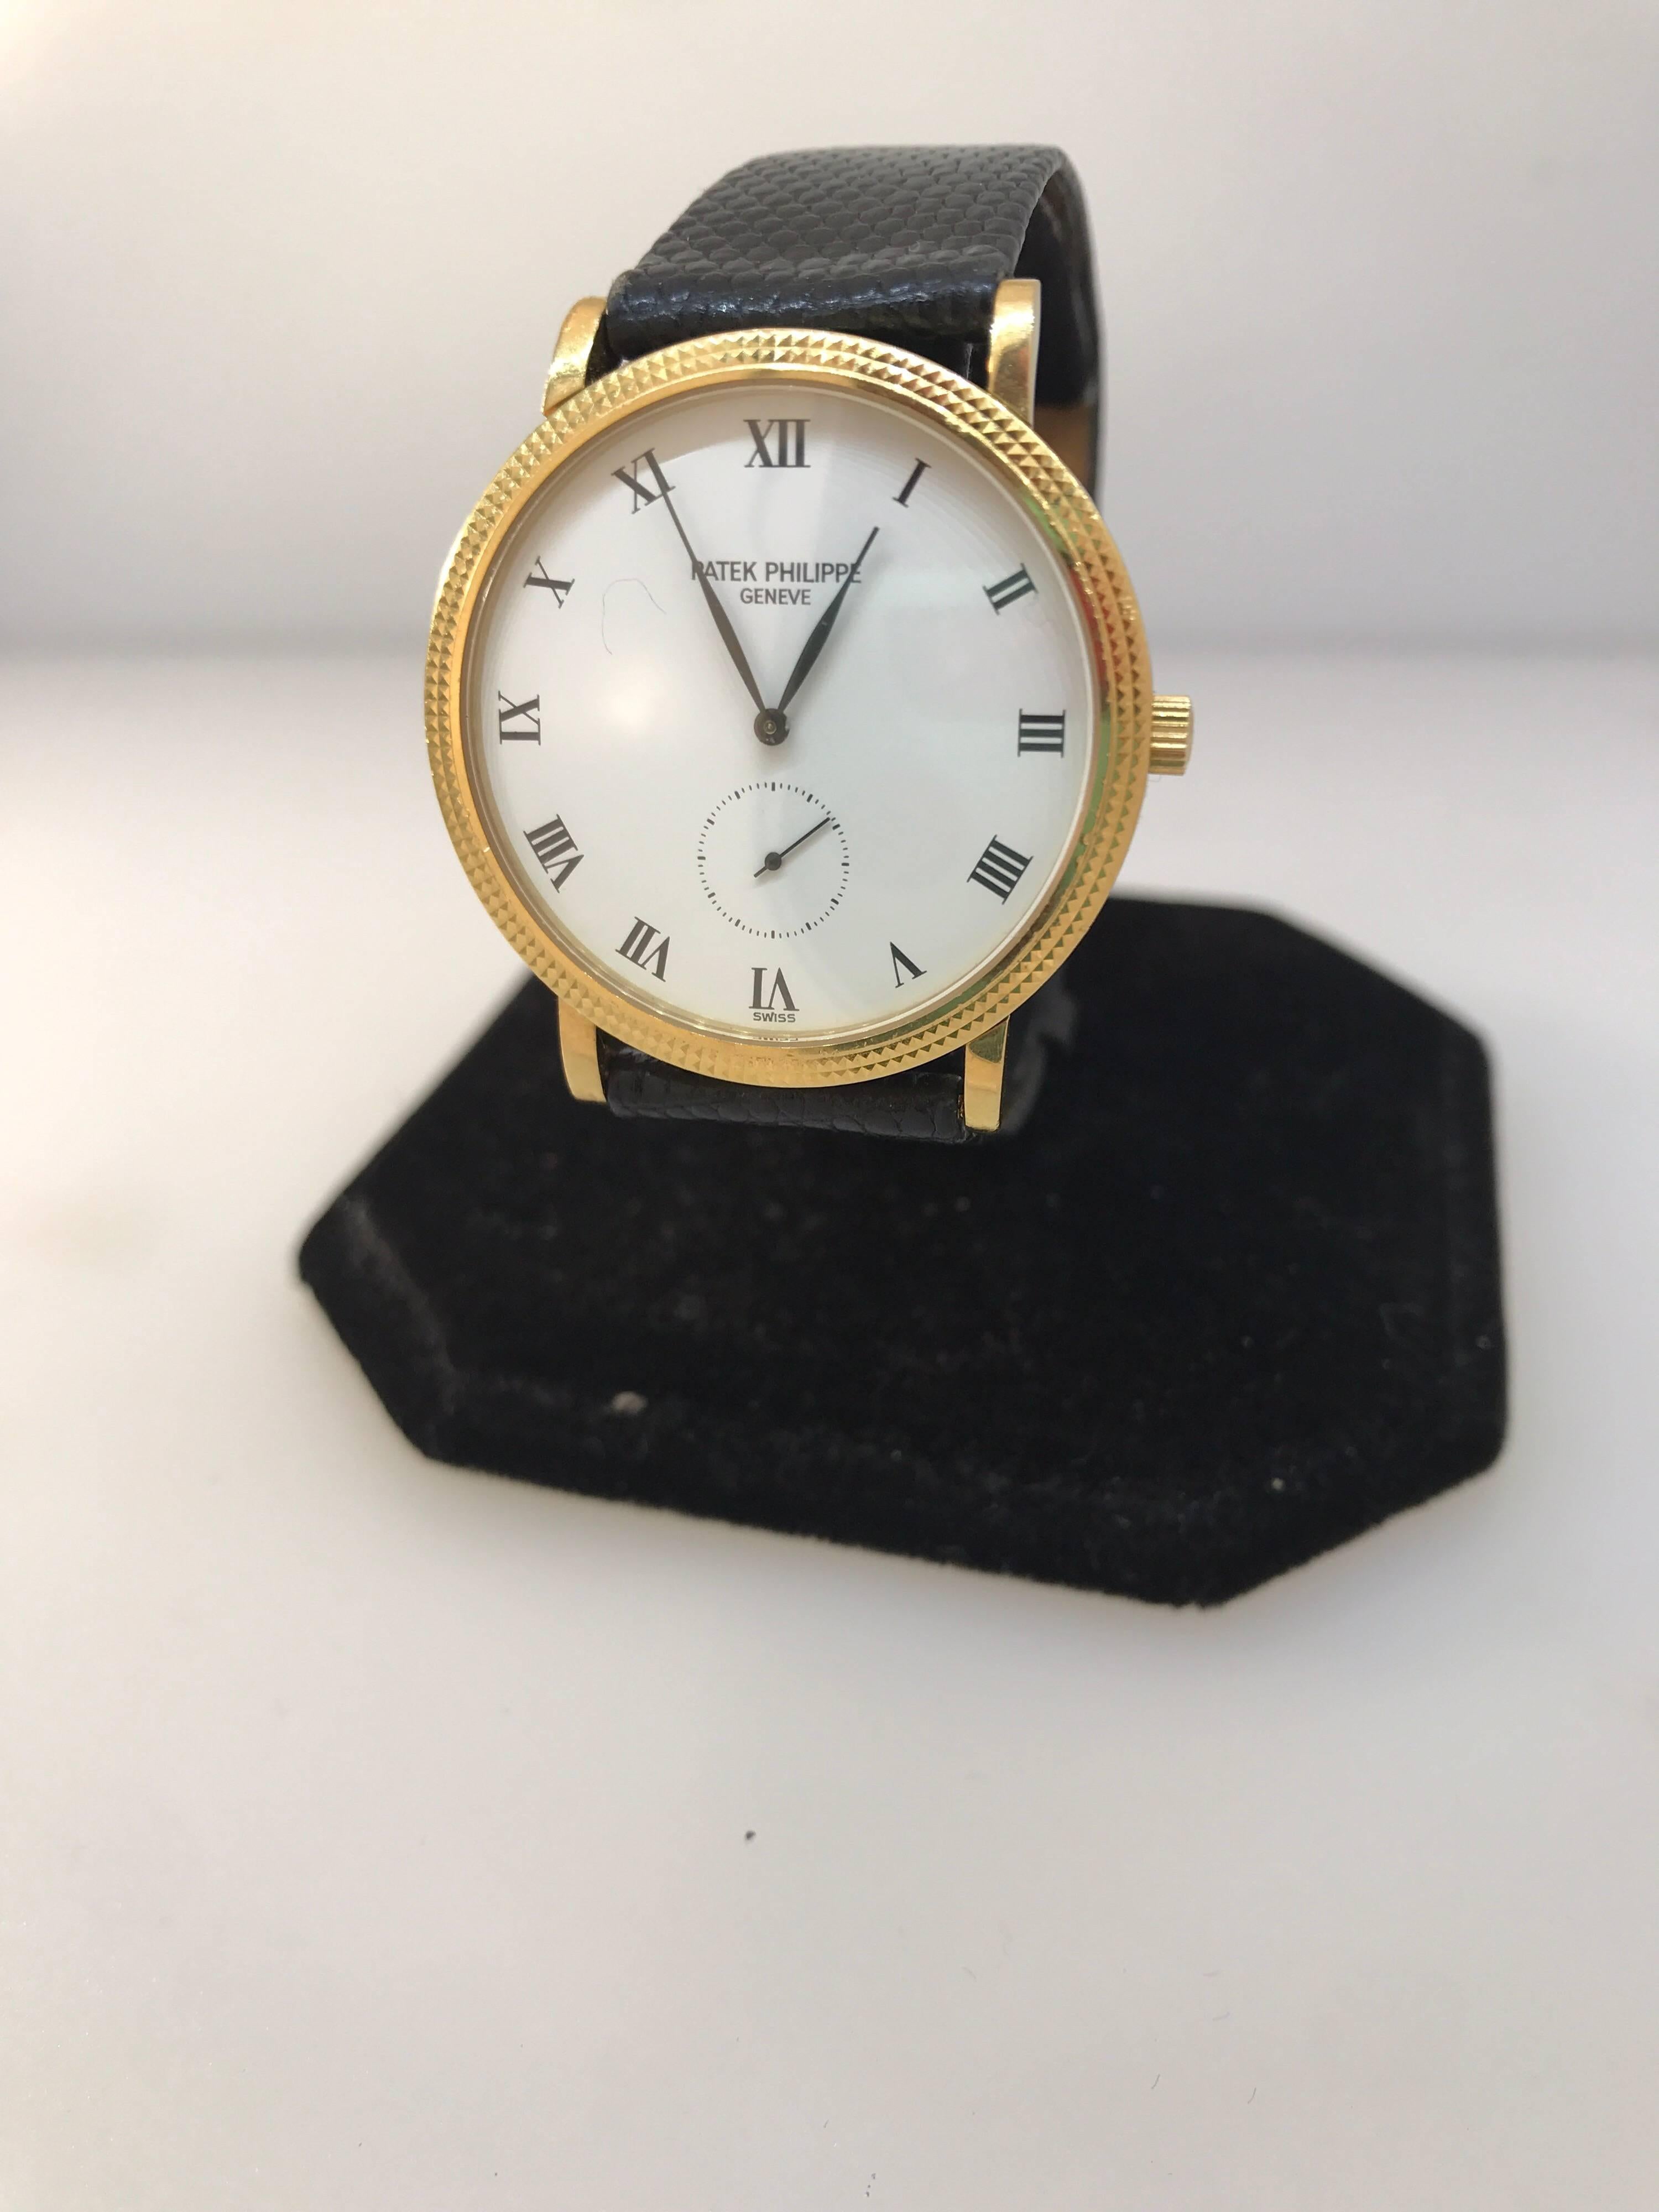 Patek Philippe Calatrava Men's Watch

Model Number: 3919J

100% Authentic

Pre-Owned in Excellent

Comes with a generic watch box

18 Yellow Gold Case & Buckle

Scratch Resistant Sapphire Crystal

White Dial

Roman Numeral Hour Markers

Case